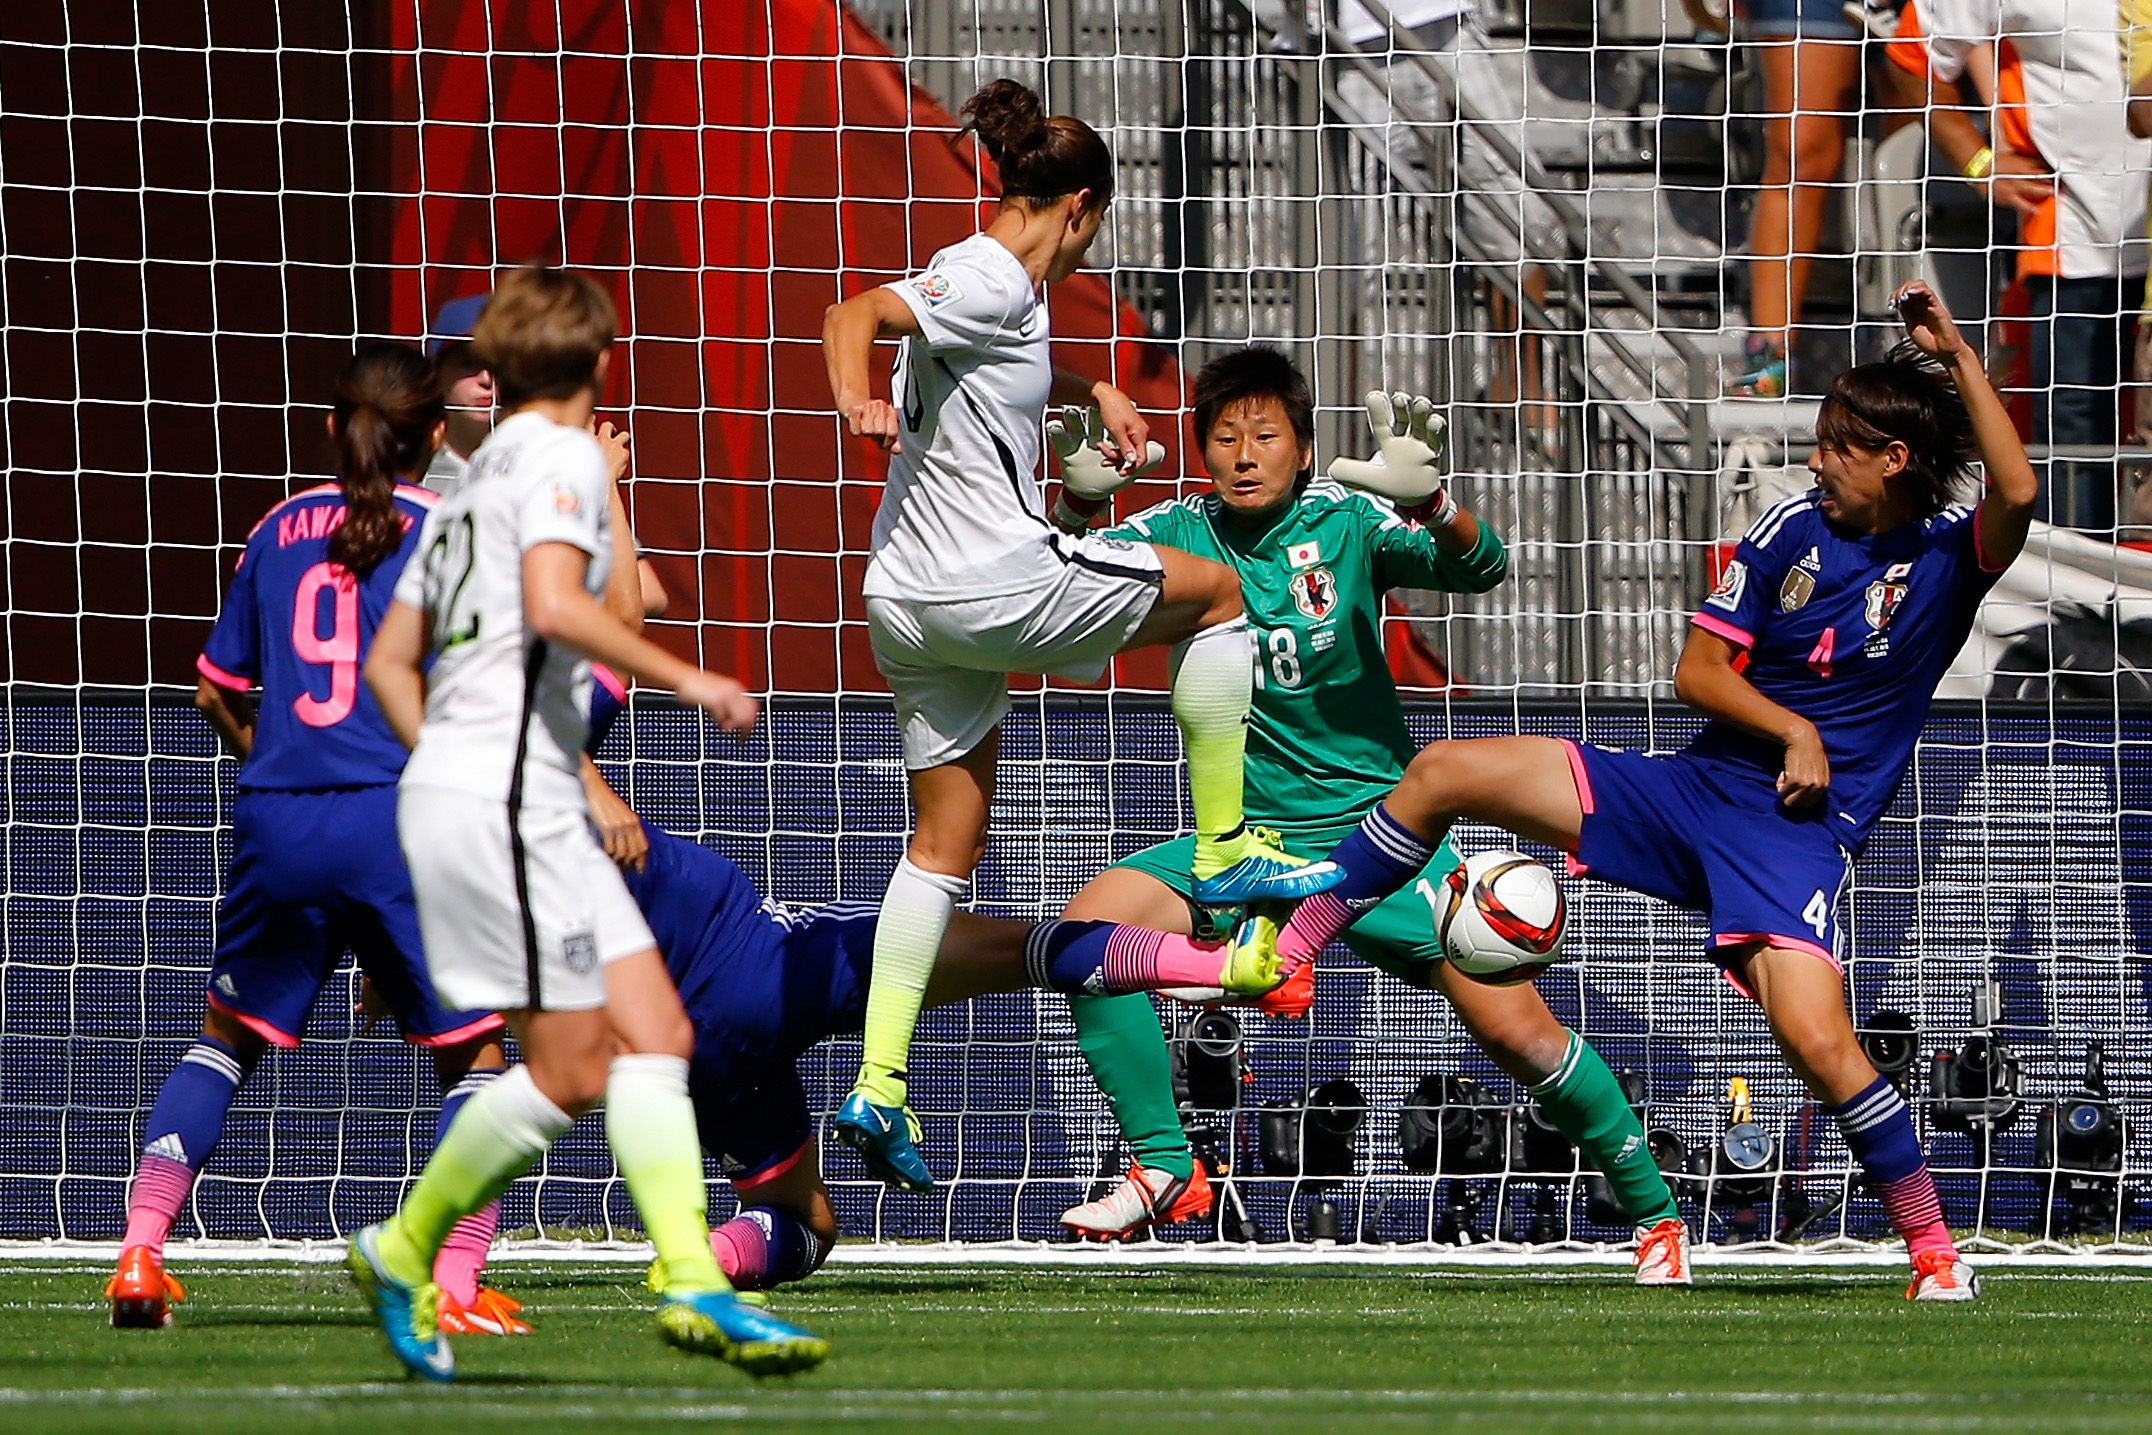 USA vs. Australia - Team USA's World Cup in 30 photos - Pictures - CBS News